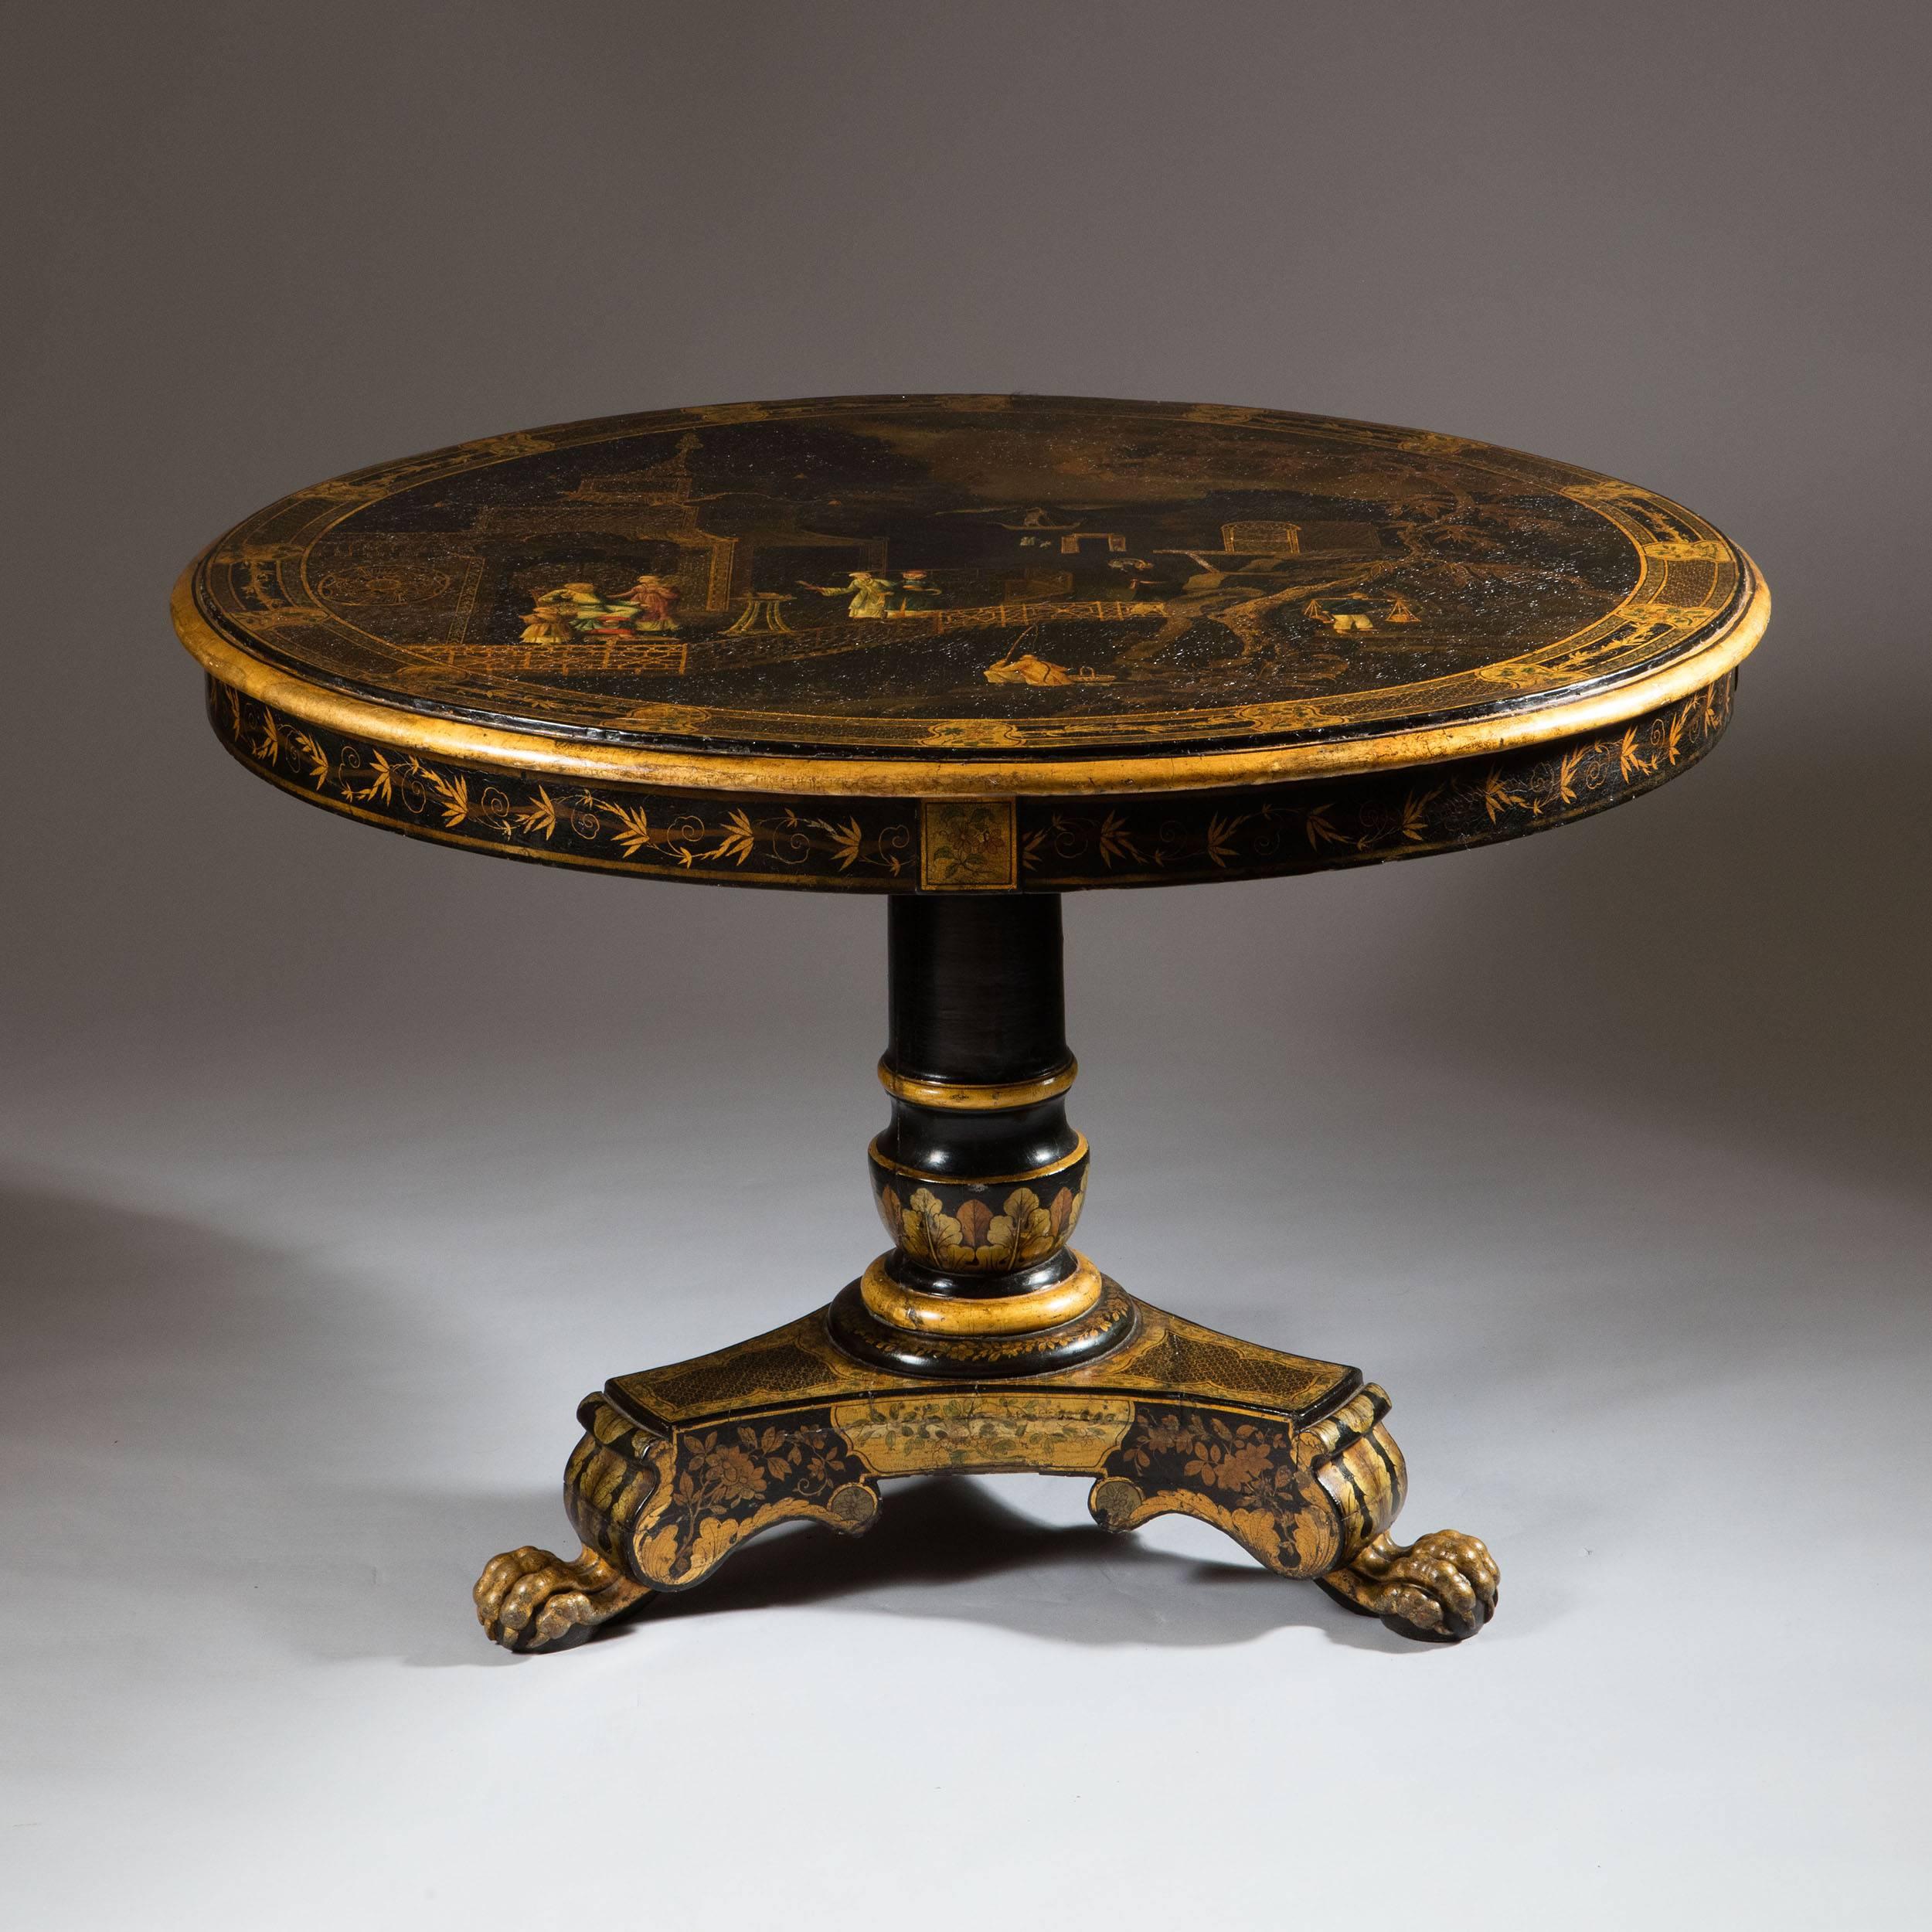 19th Century Regency, Chinese Export Tilt-Top Center Table In Excellent Condition In London, by appointment only